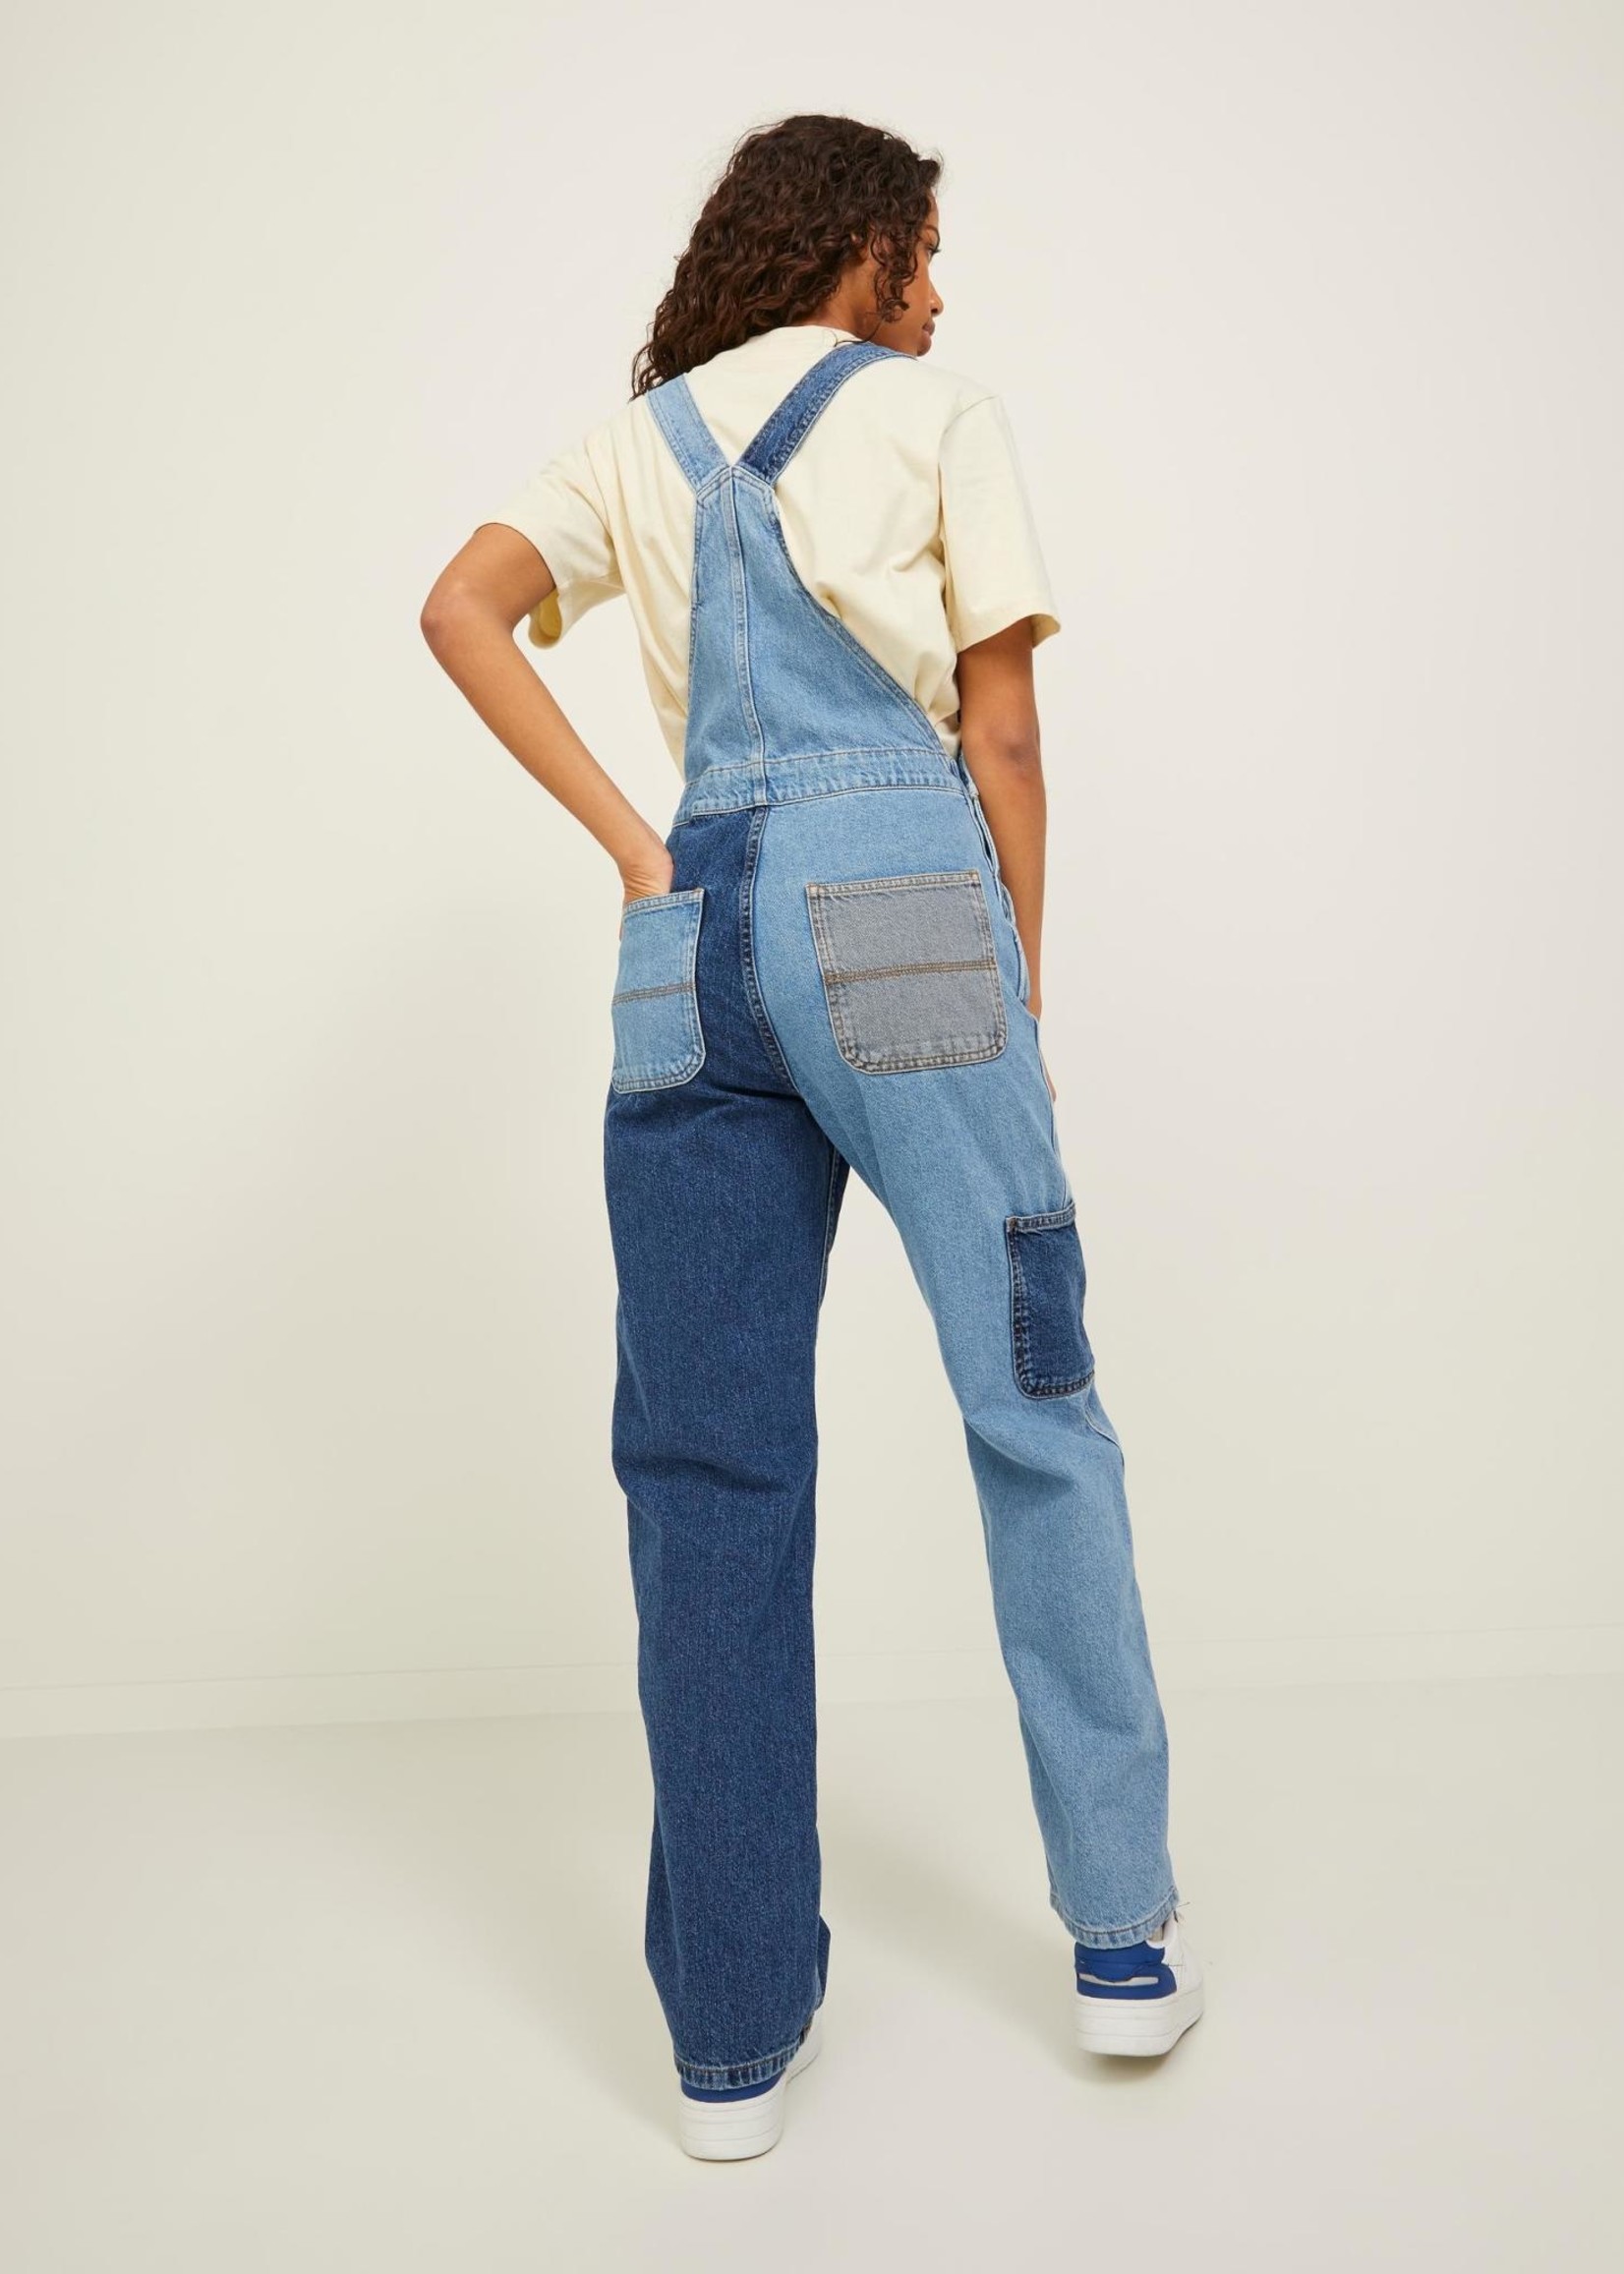 JXCALA TWO TONE OVERALL - MED BLUE